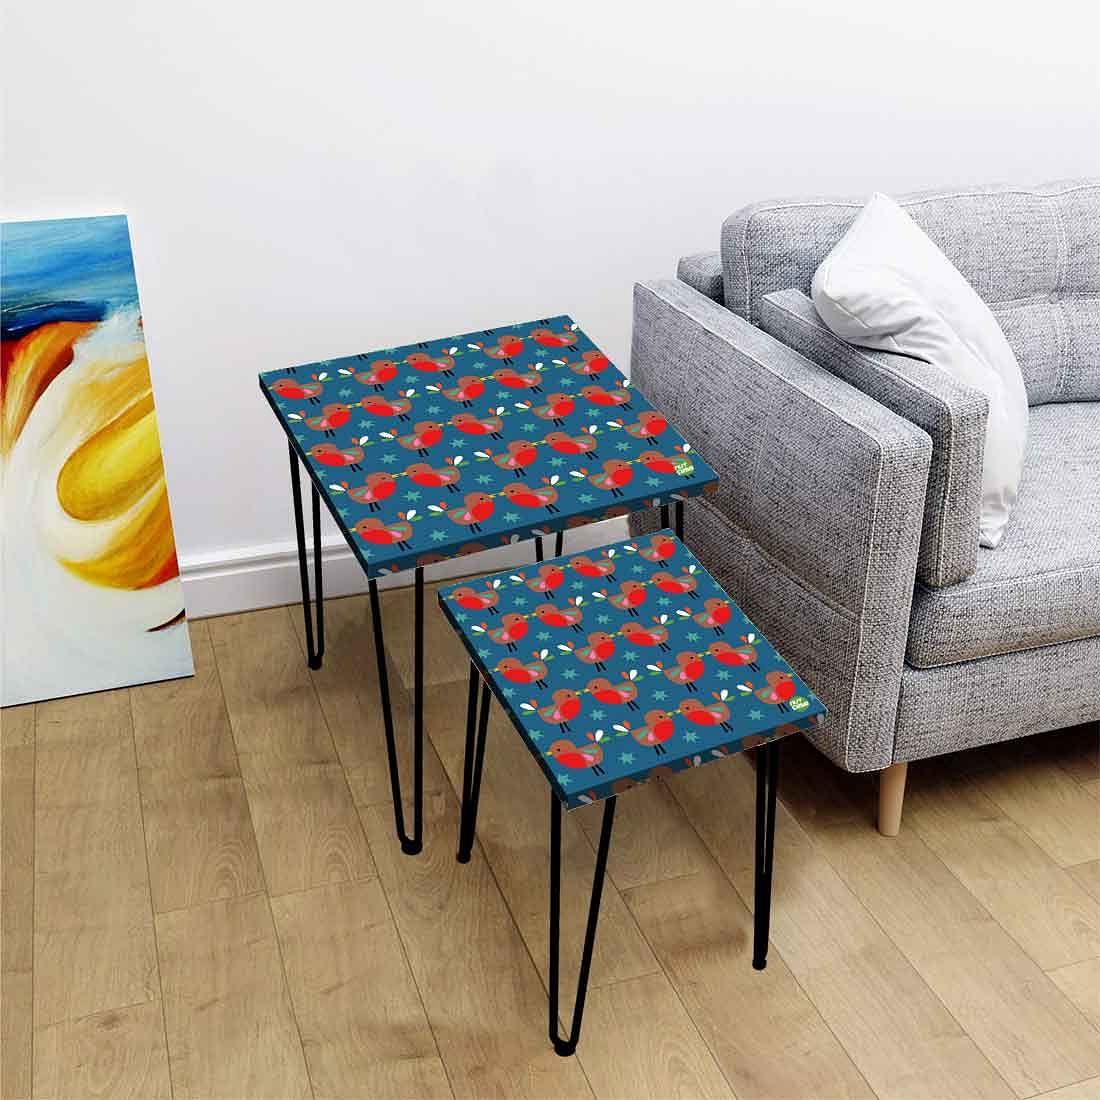 Nesting Tables Set Of 2 Nest of Tables for Living Room - Cute Birds Nutcase